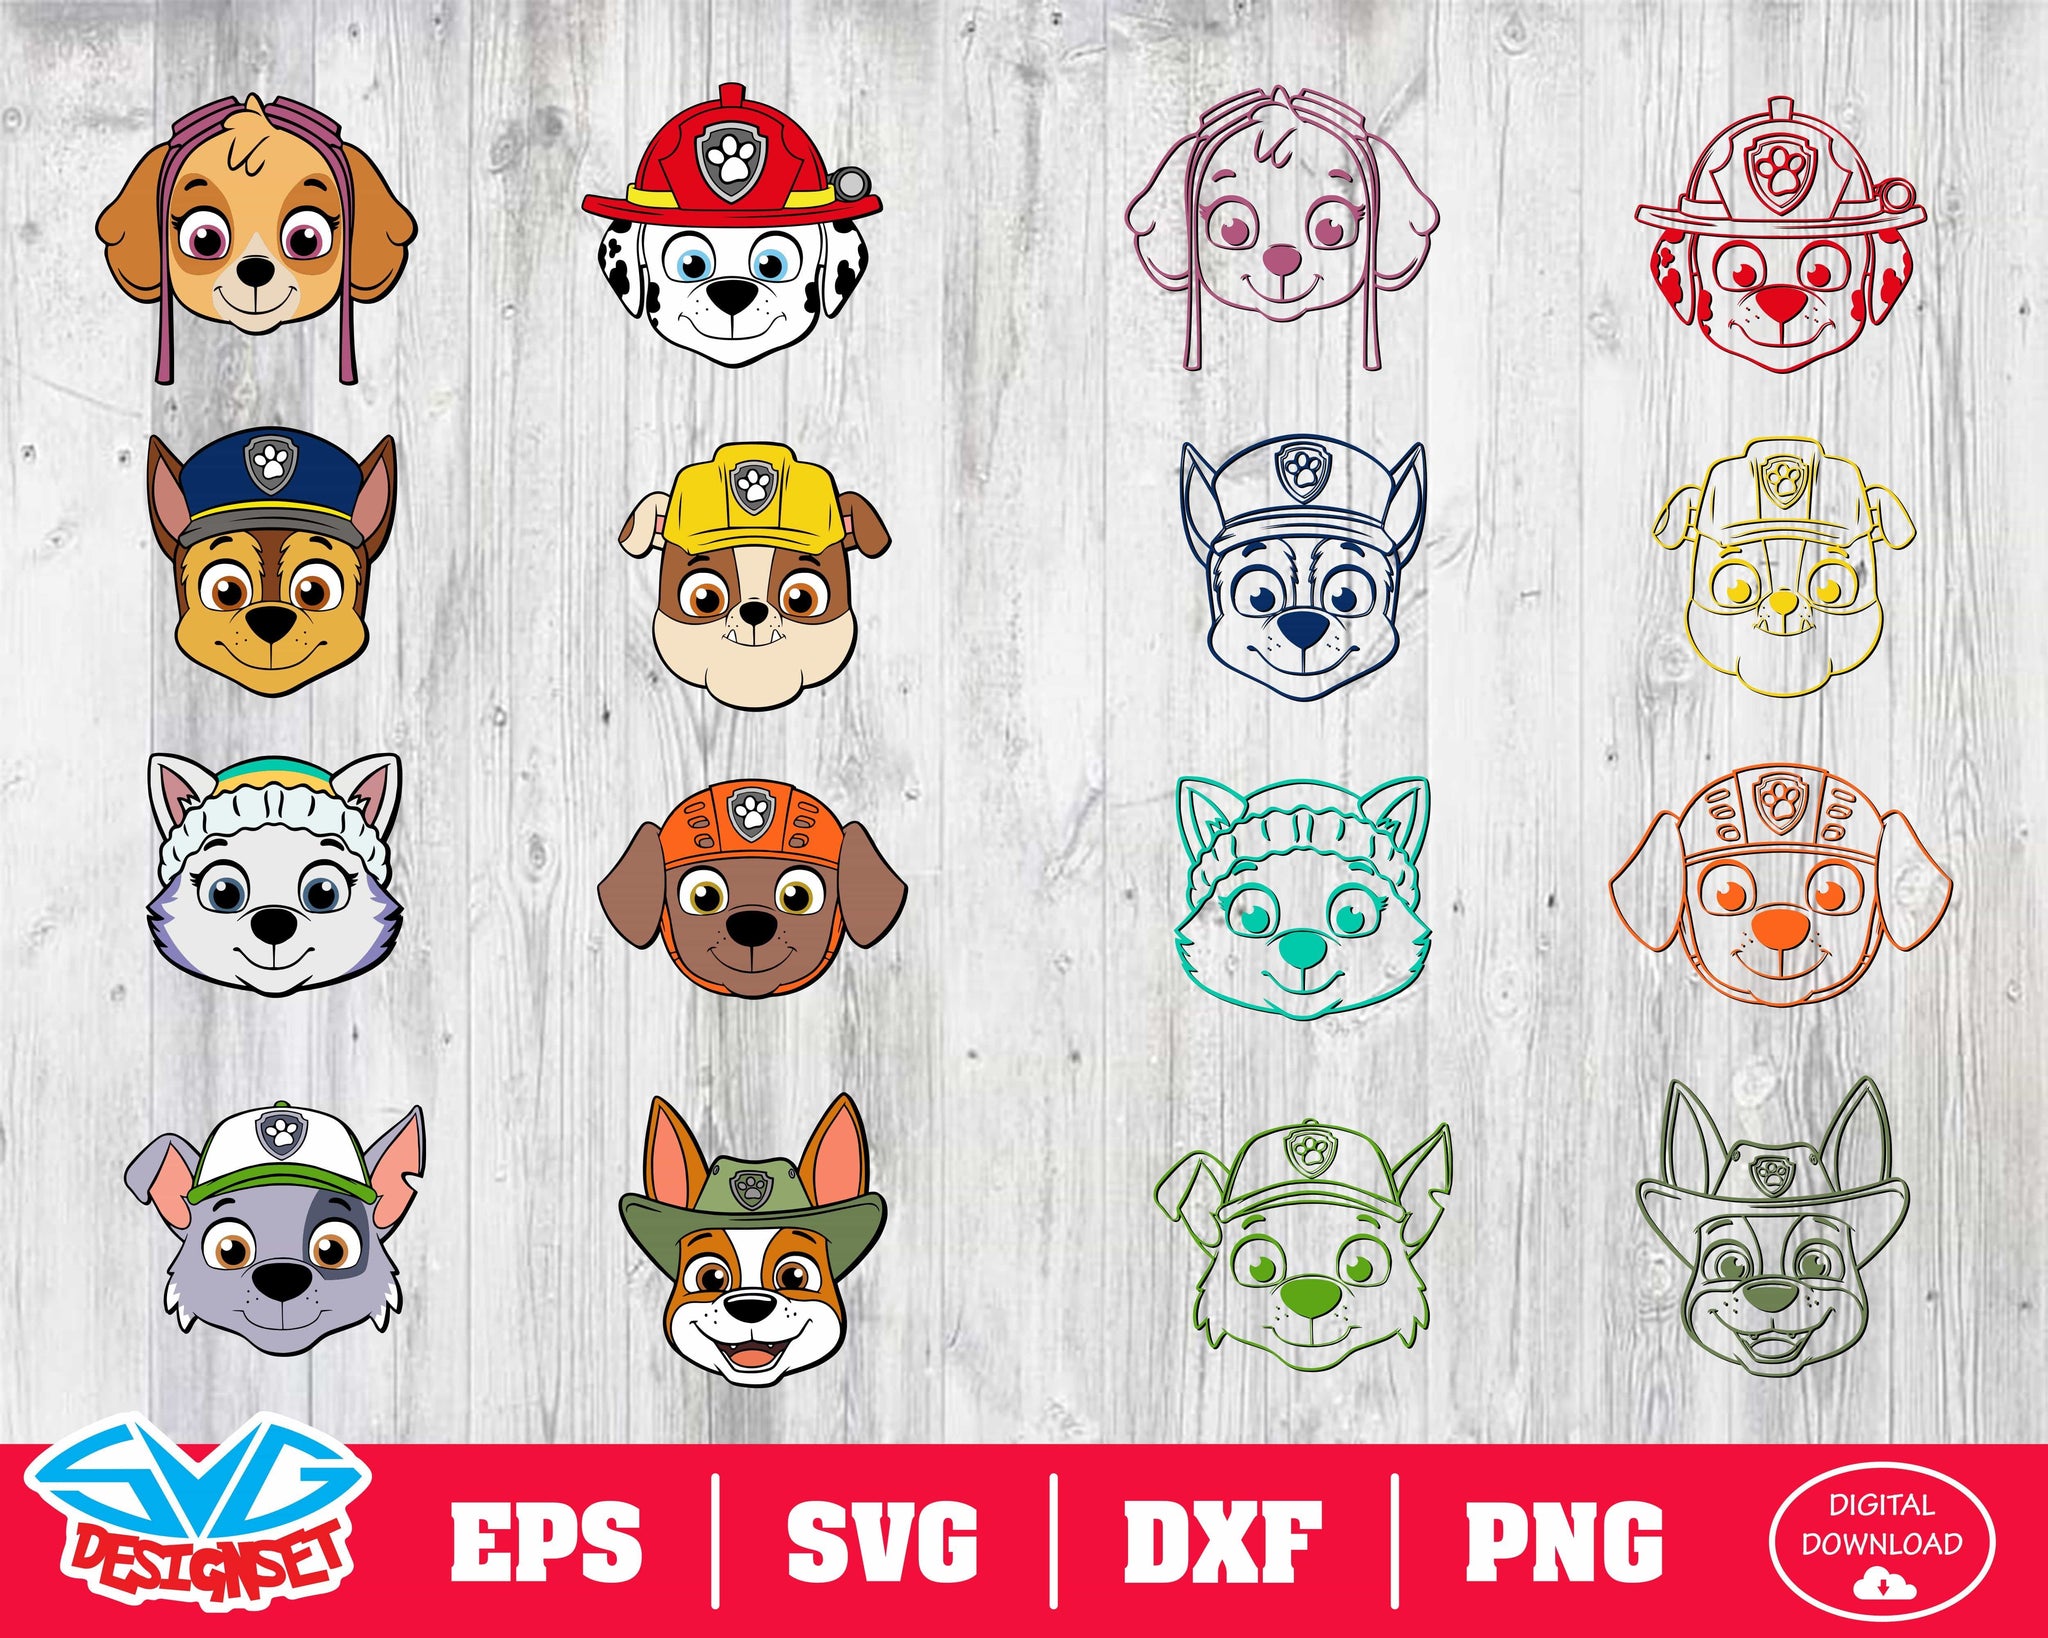 Paw patrol face Svg, Dxf, Eps, Png, Clipart, Silhouette and Cutfiles - SVGDesignSets